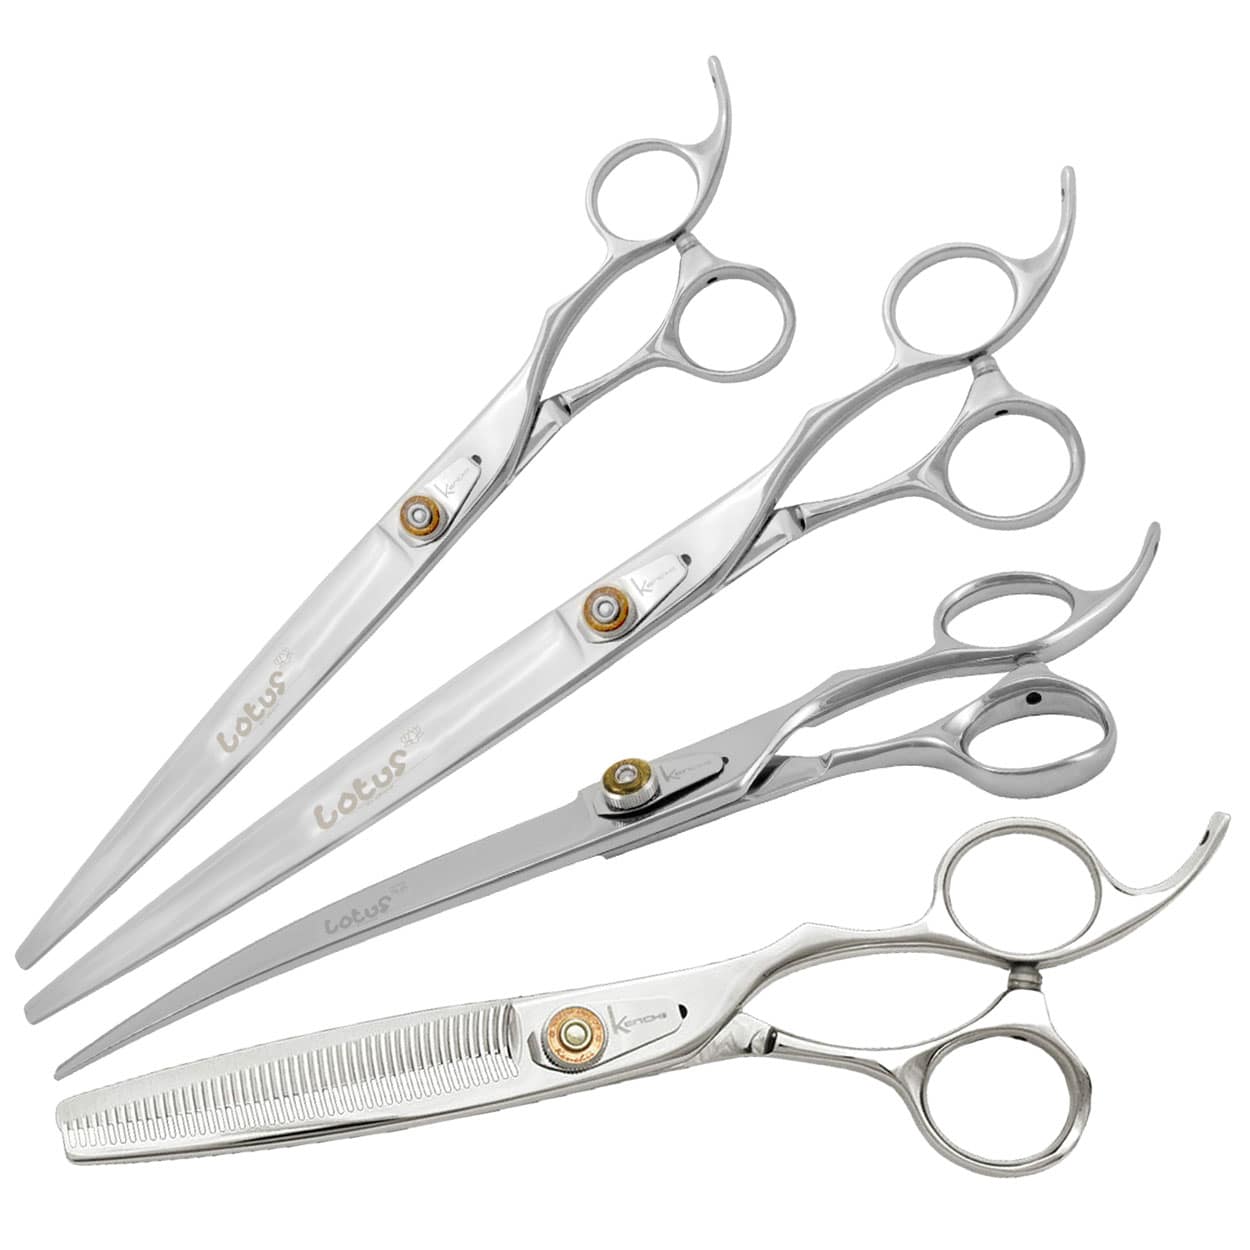 How To Take Care Of Your Haircutting Scissors - Kenchii Beauty